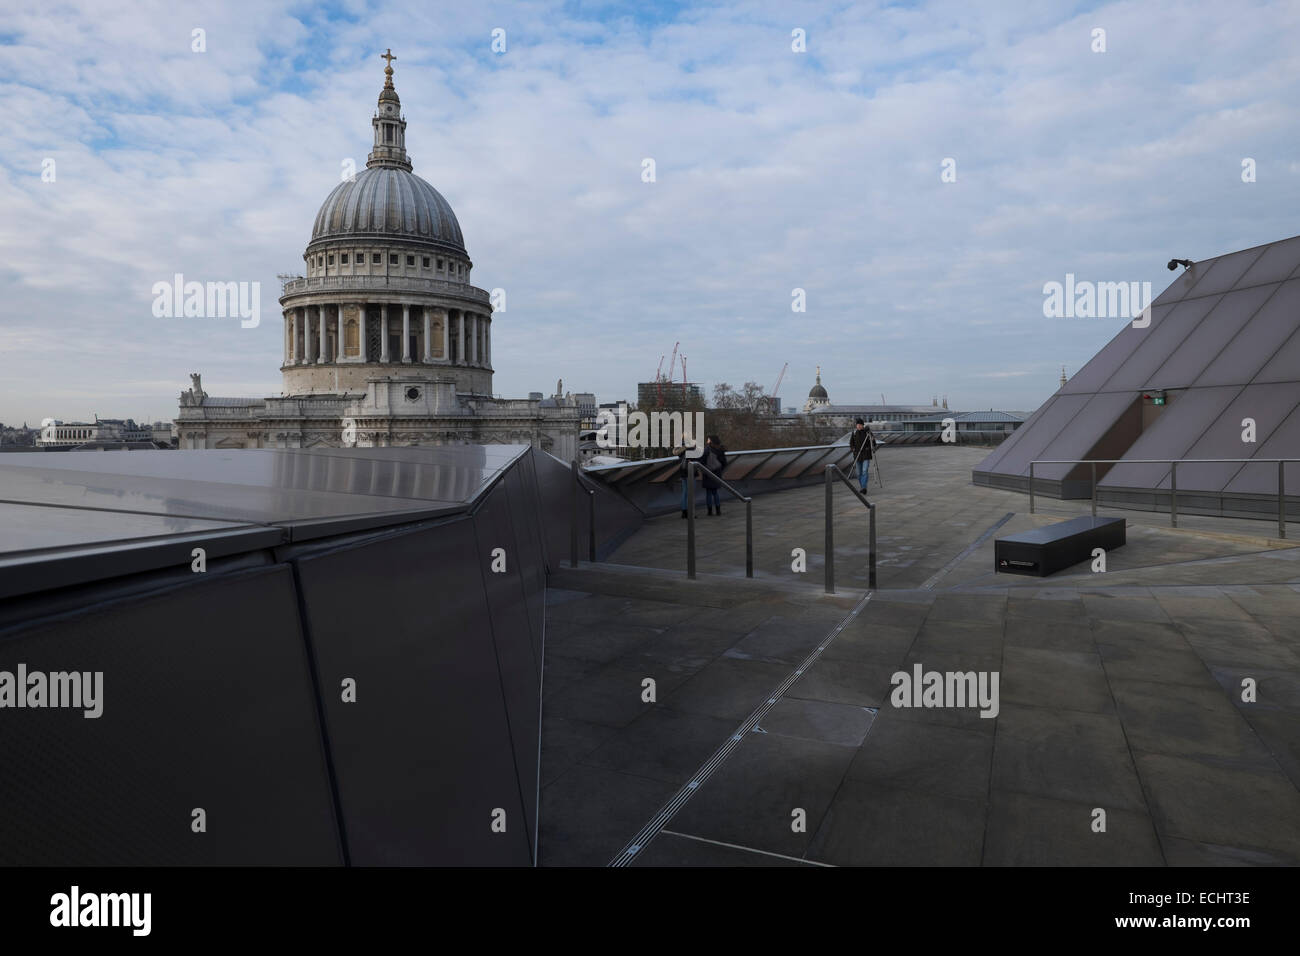 General view images of and around St Paul's Cathedral in London, UK Stock Photo